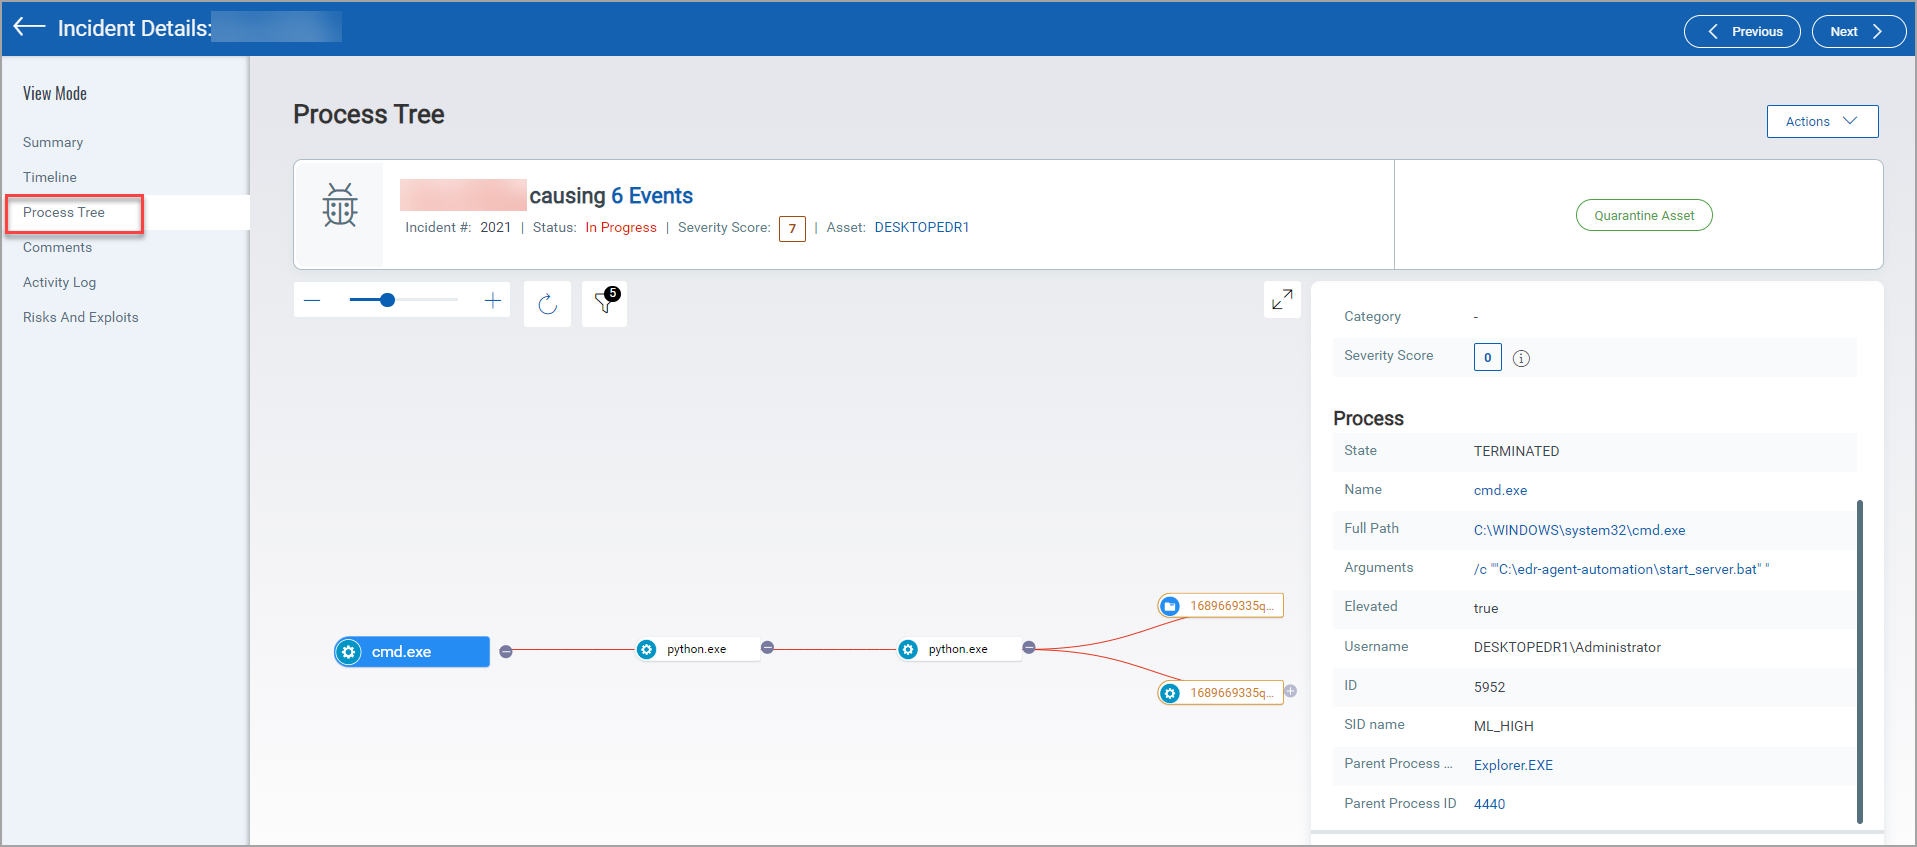 Process Tree in Incident Details page